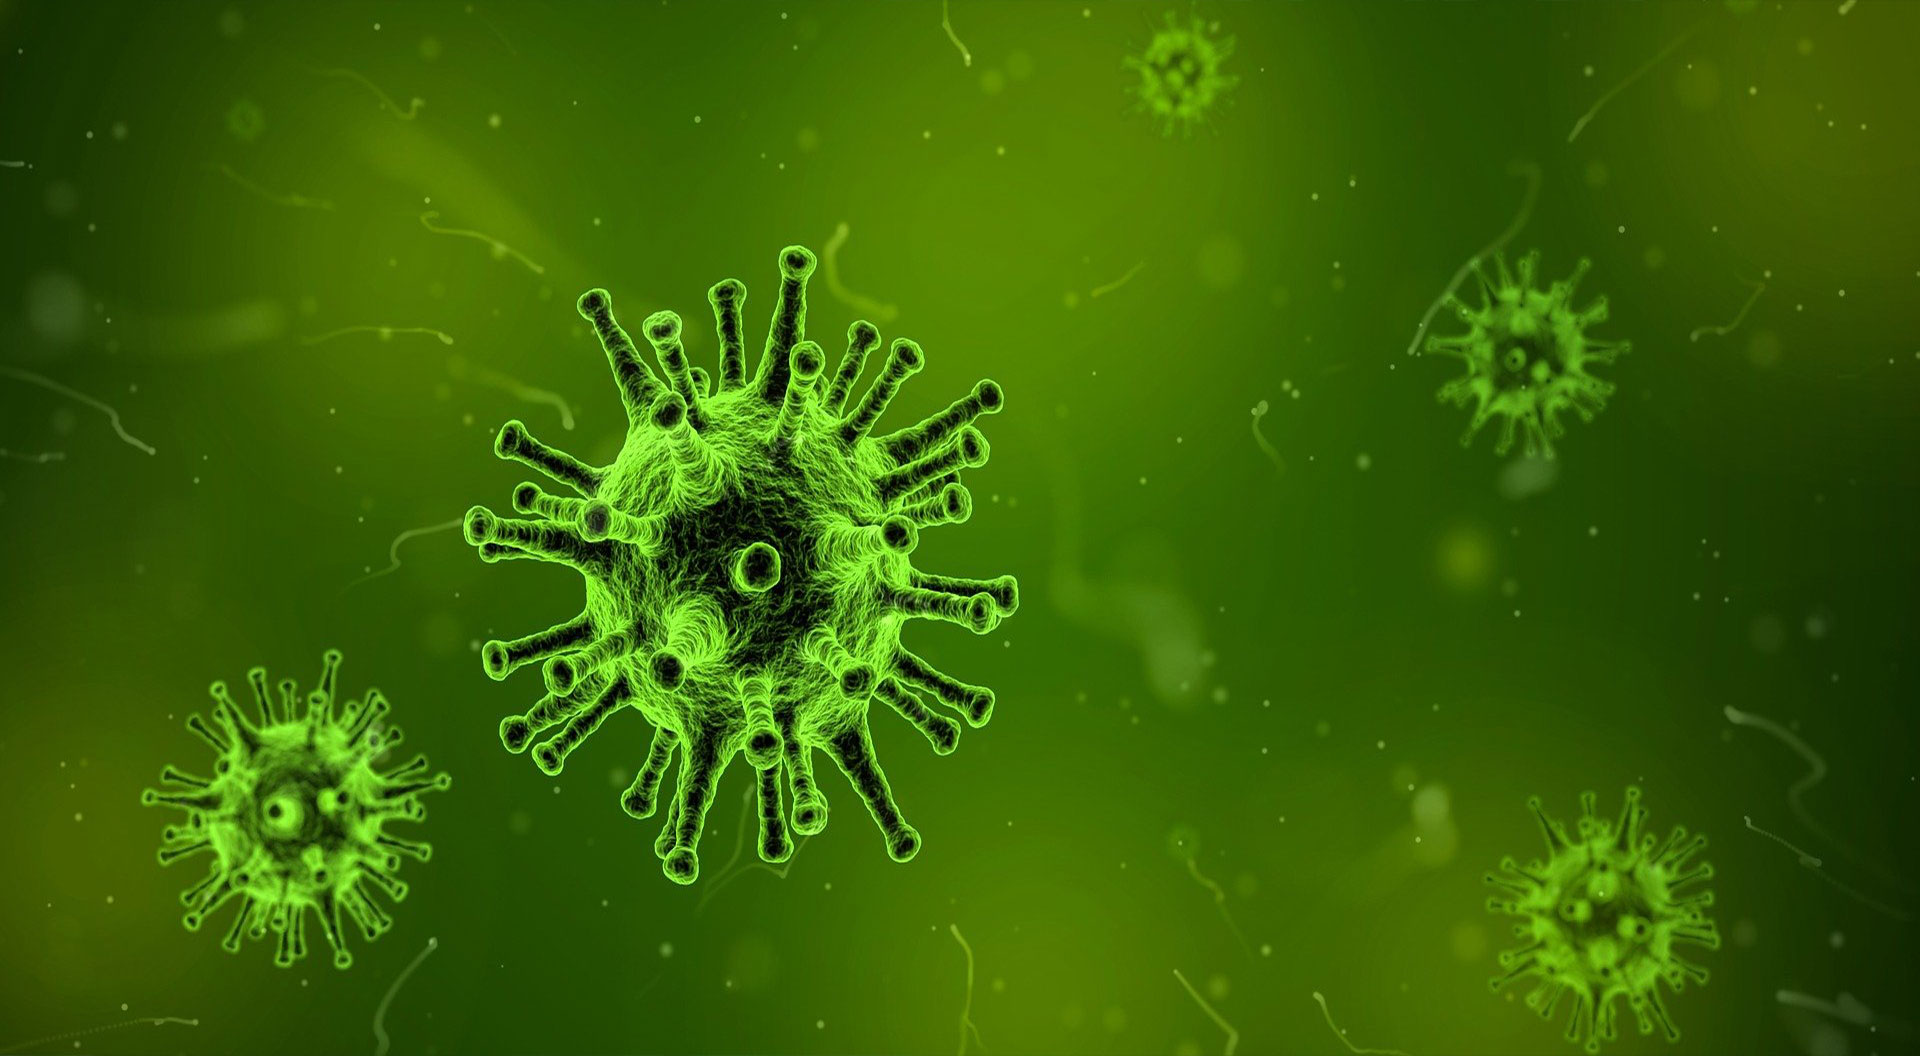 spiked virus on green background